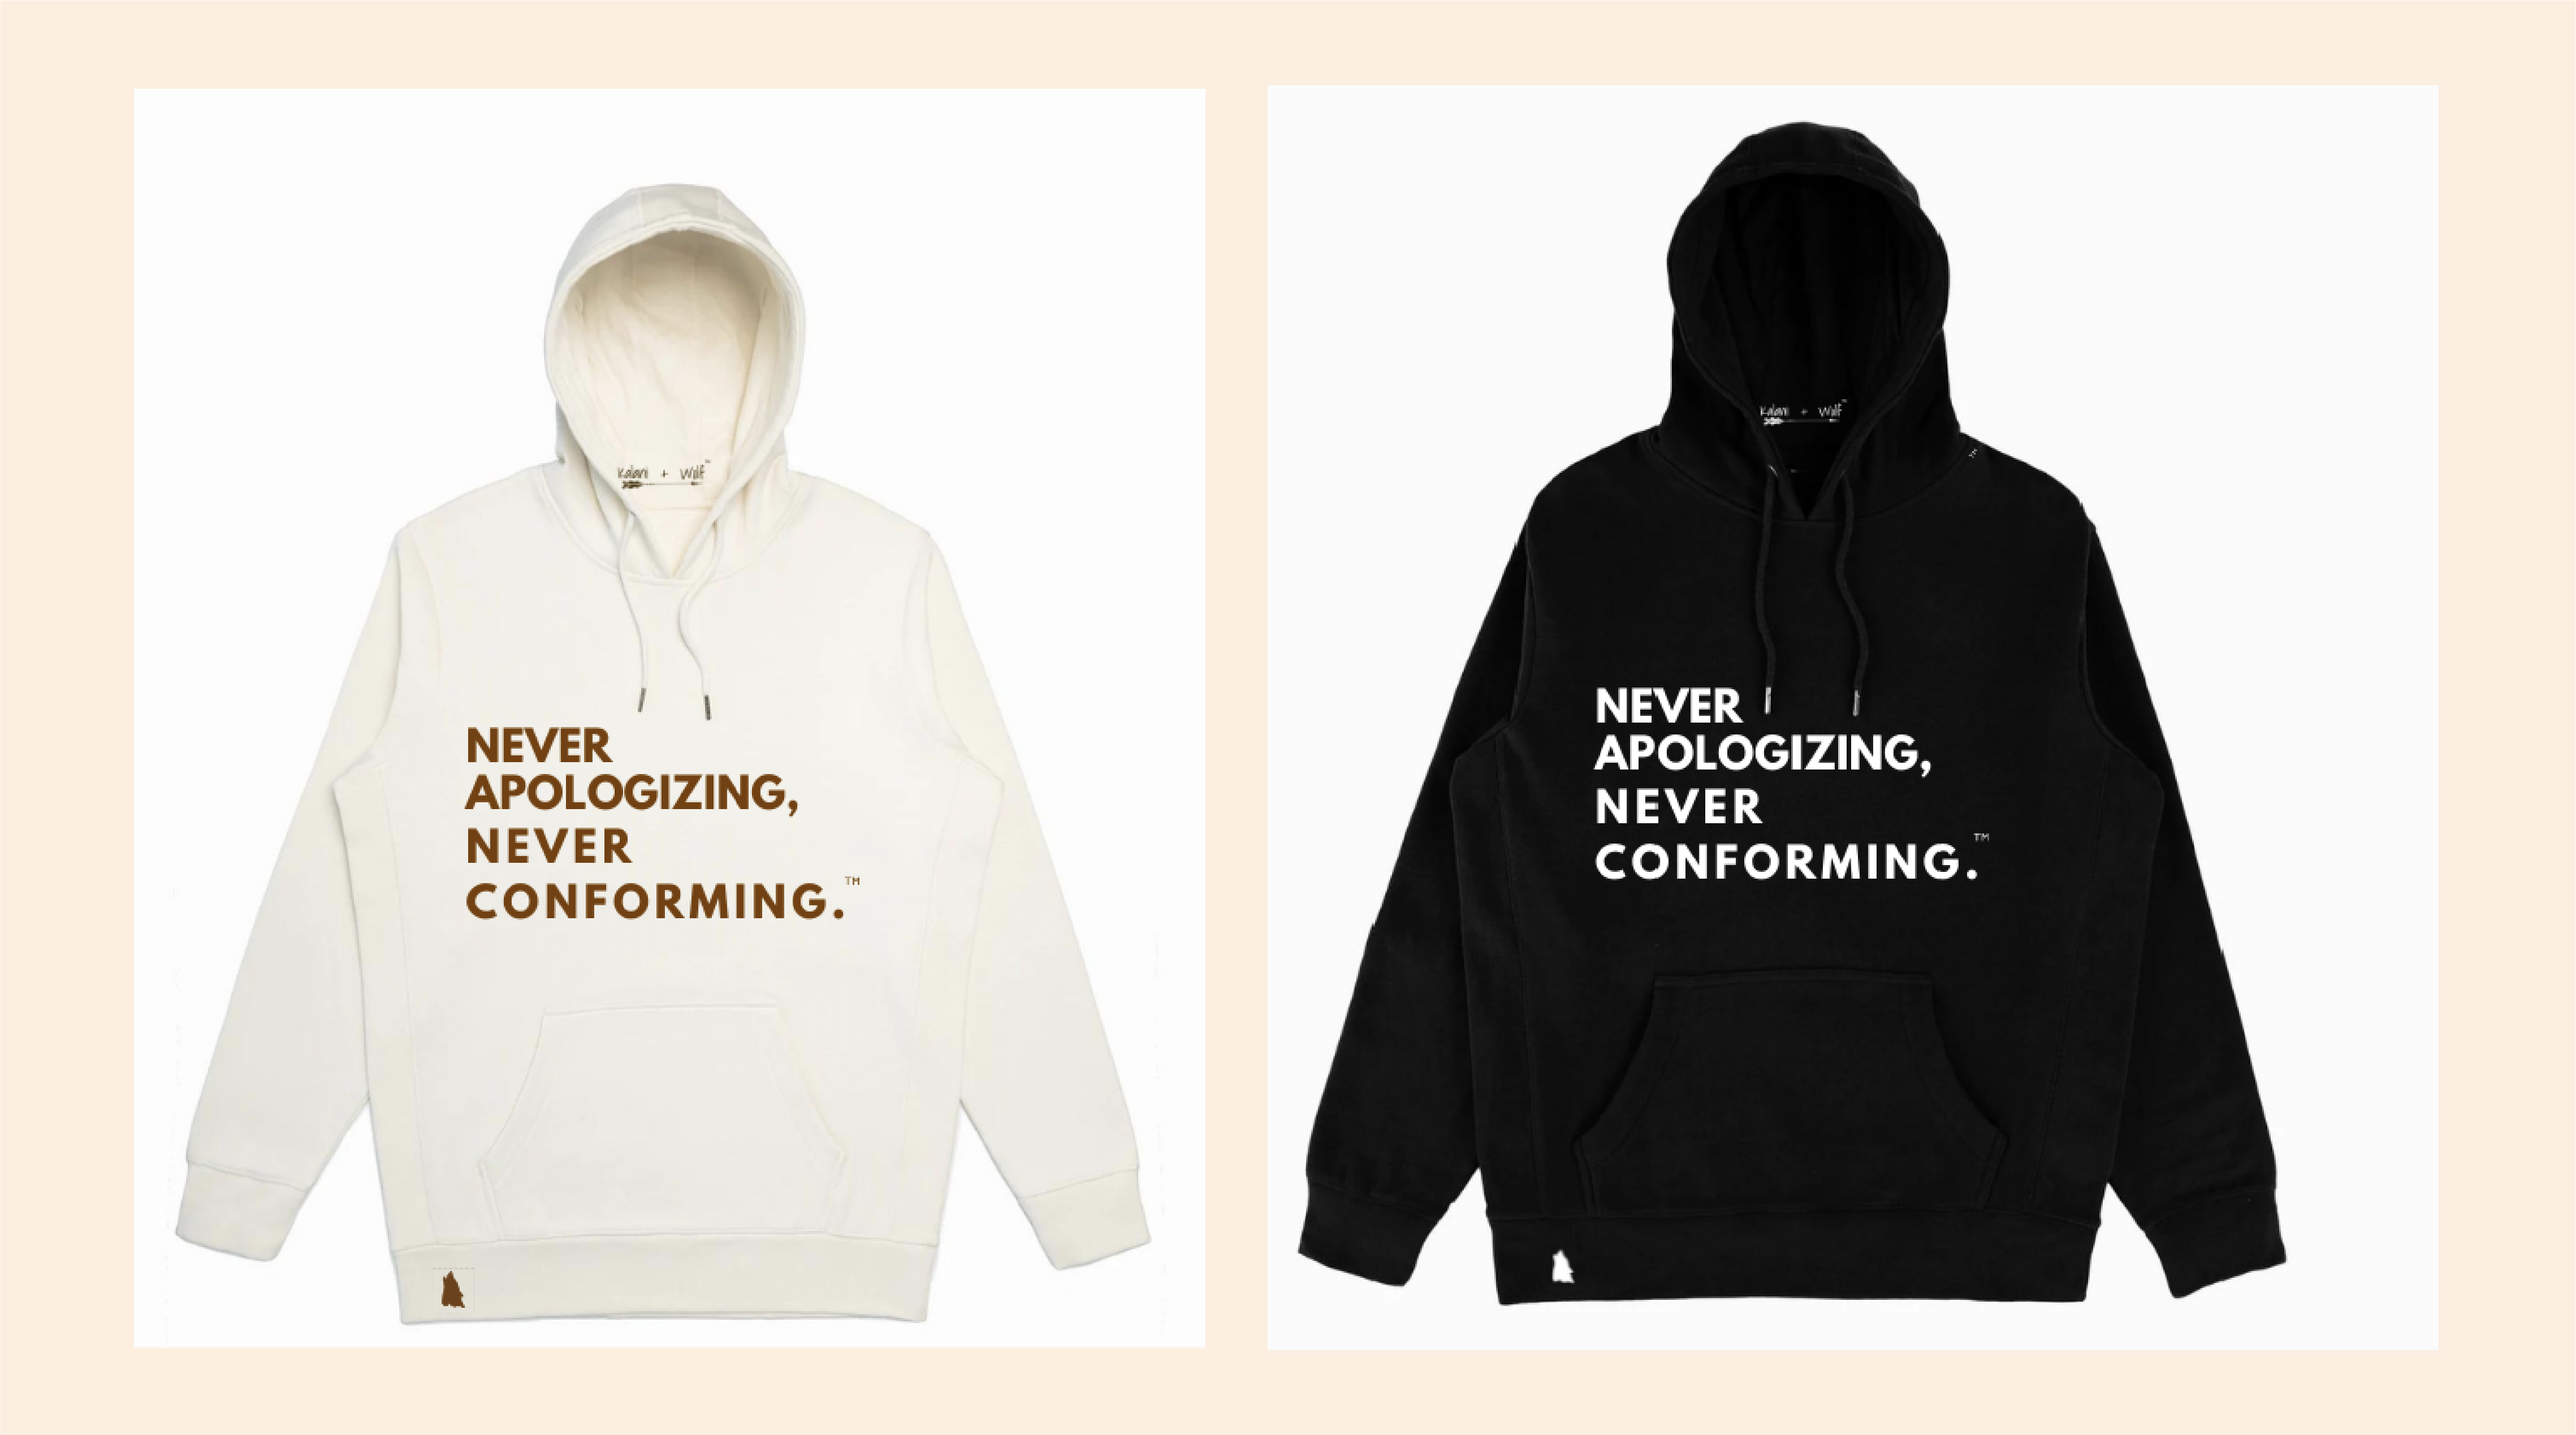 kalani and wolf never apologizing never conforming hoodies in natural and black supima cotton ifundwomen crowdfunding campaign